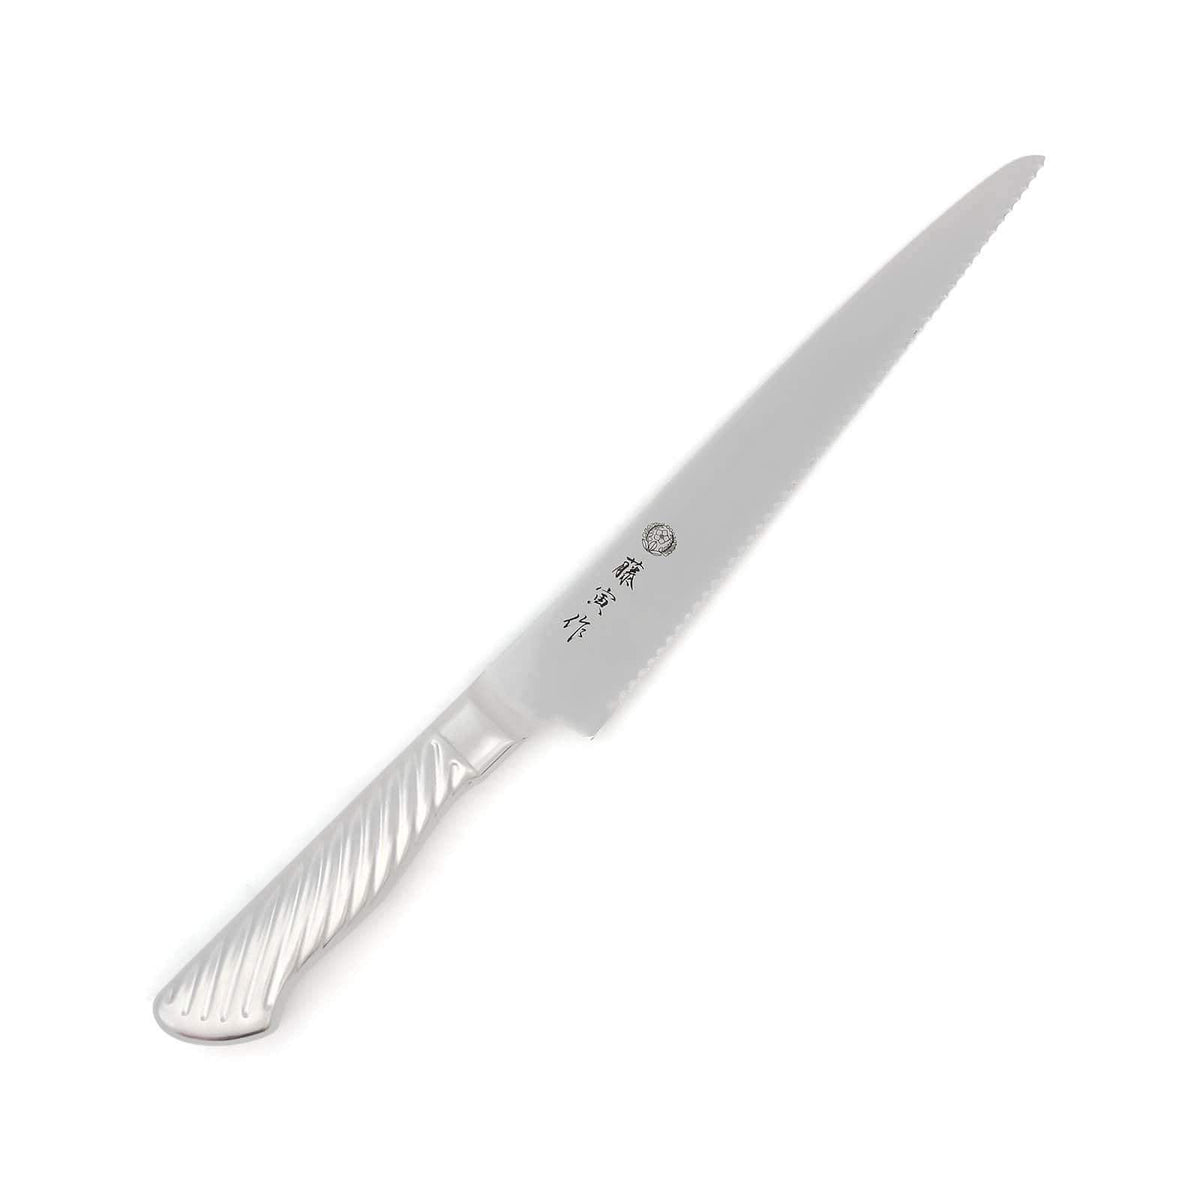 Tojiro Fujitora SD Bread Knife with Stainless Steel Handle 215mm FU-629 Bread Knives